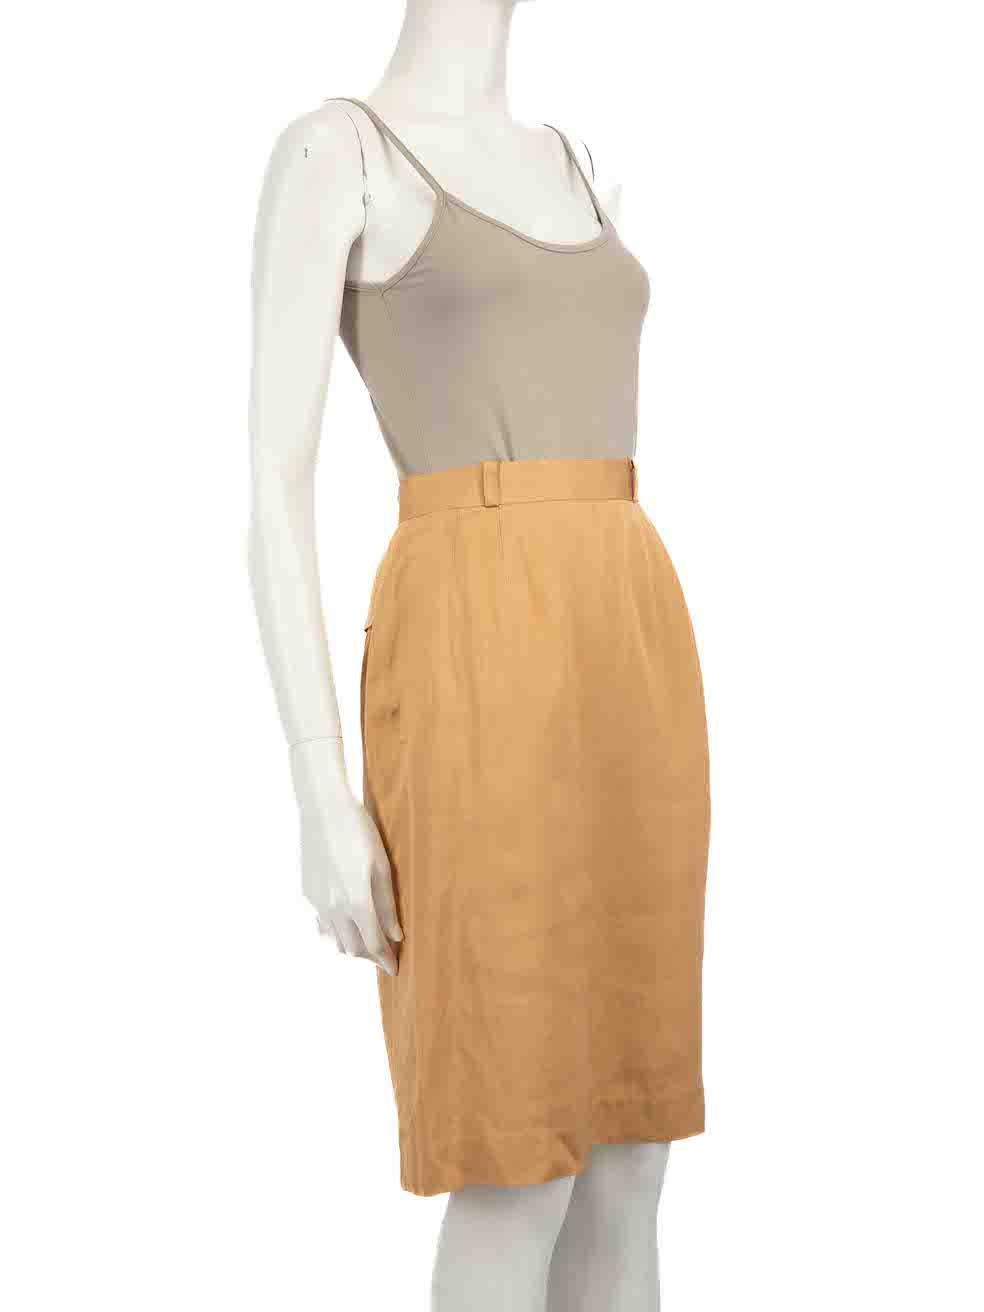 CONDITION is Very good. Hardly any visible wear to skirt is evident on this used Christian Dior designer resale item.
 
 
 
 Details
 
 
 Beige
 
 Silk
 
 Straight skirt
 
 Knee length
 
 2x Side pockets
 
 2x Back pockets
 
 Back zip and hook